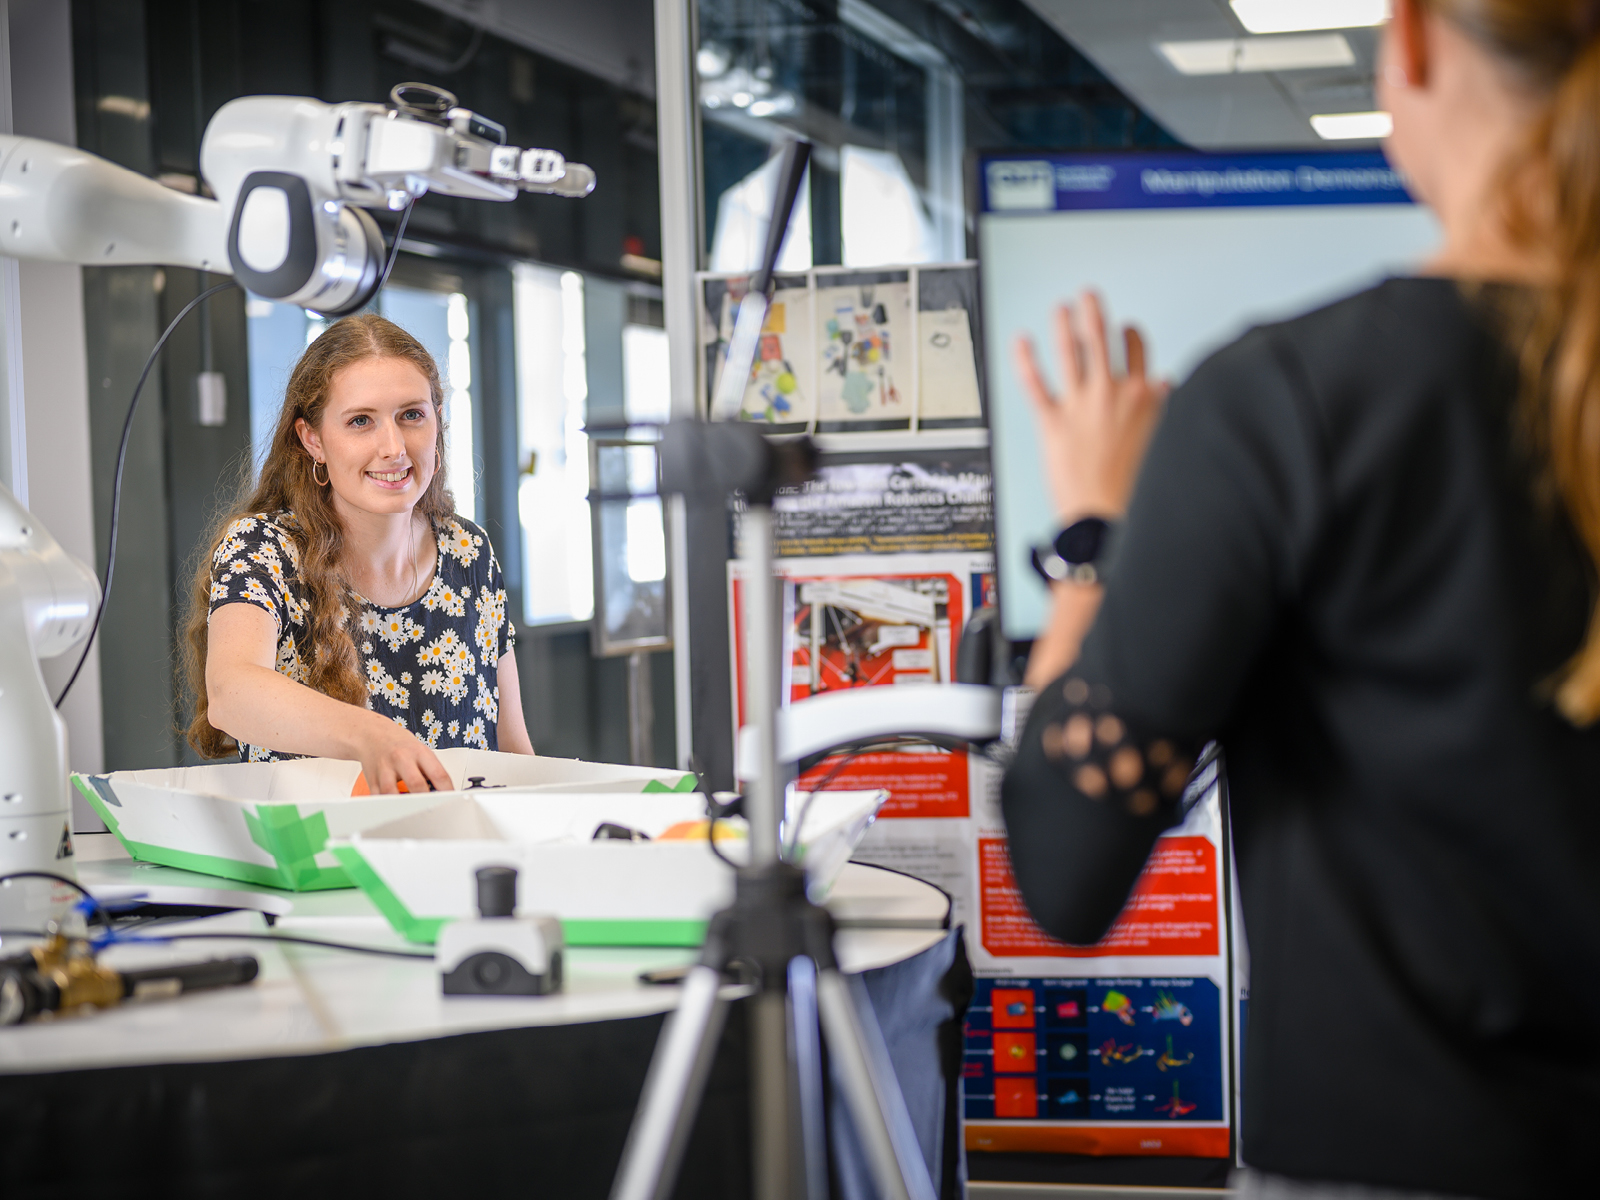 Four fascinating guided tours, free to Summit delegates, showcase QUT’s world-class capabilities in robotics and automation, agrifood innovation, tropical crops, advanced analysis and Indigenous ingredients.